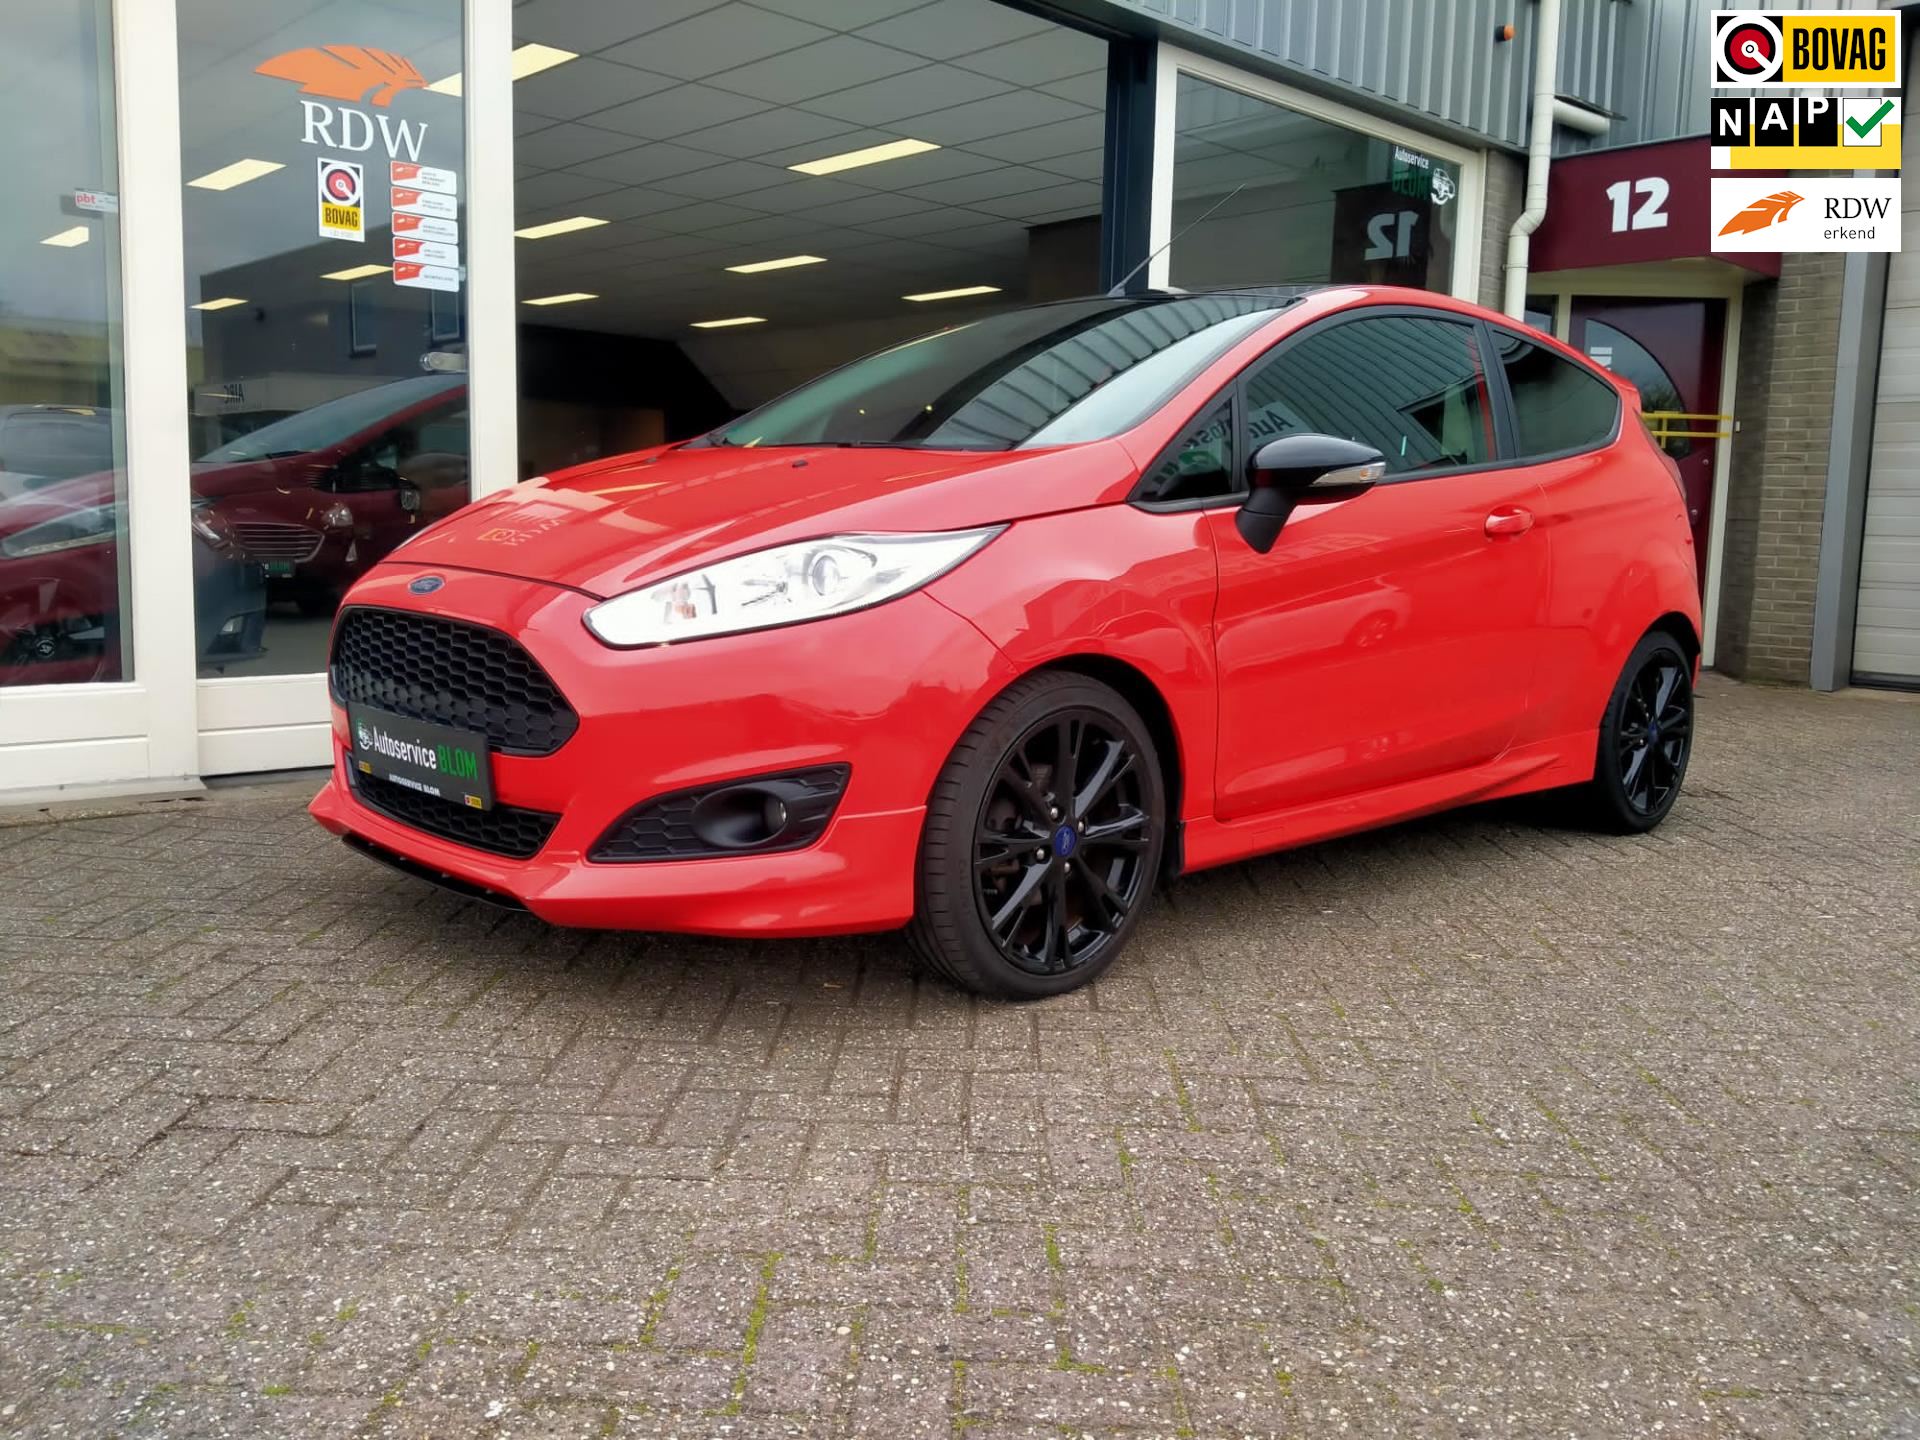 Ford Fiesta occasion - Autoservice Blom